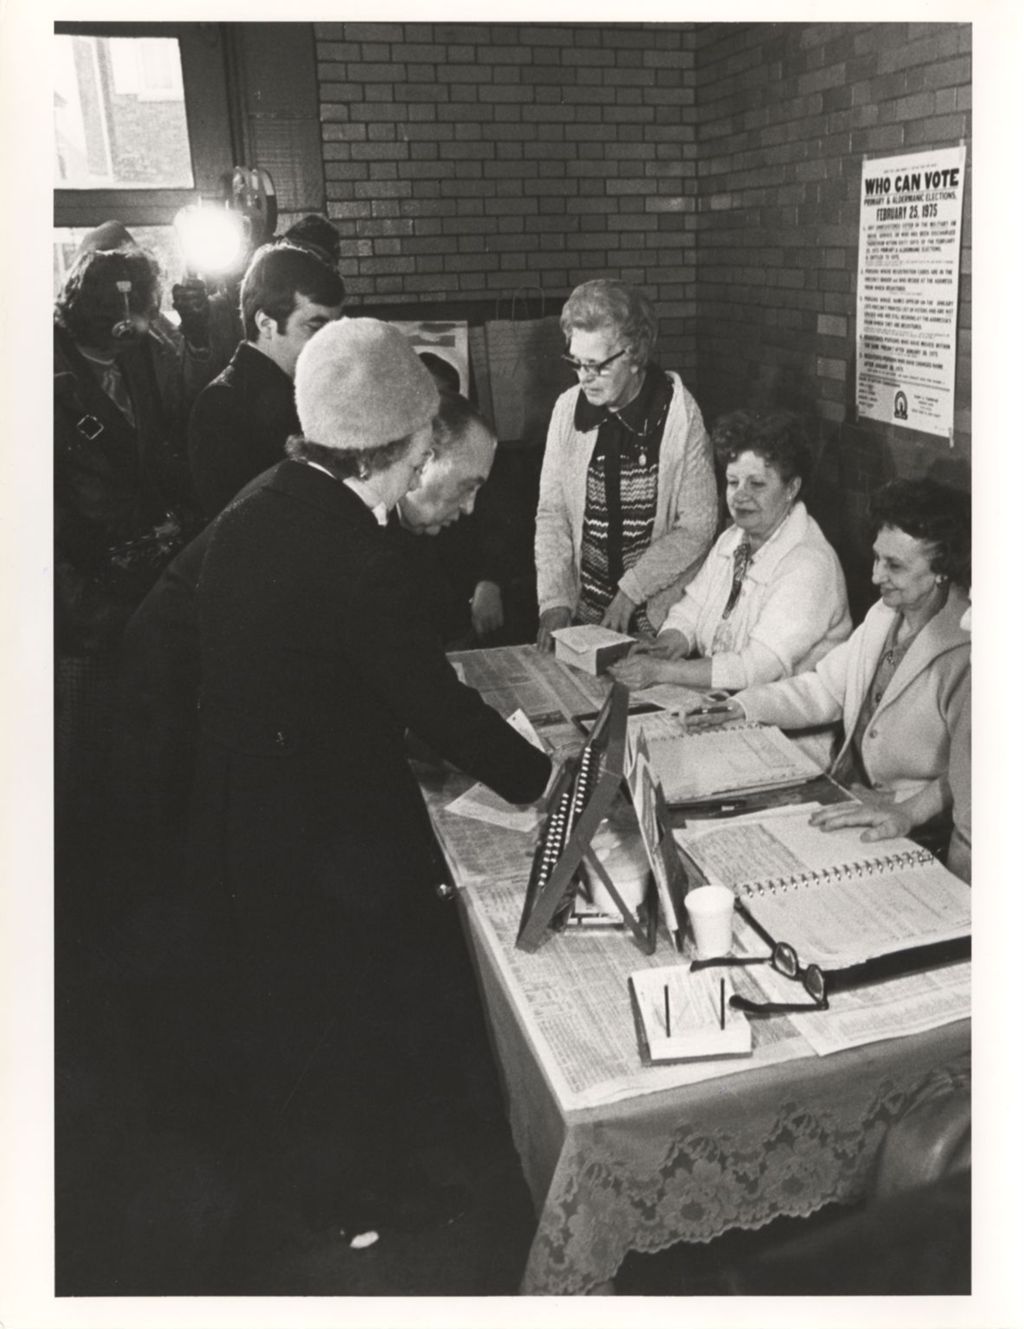 Eleanor and Richard J. Daley at 11th Ward polling place